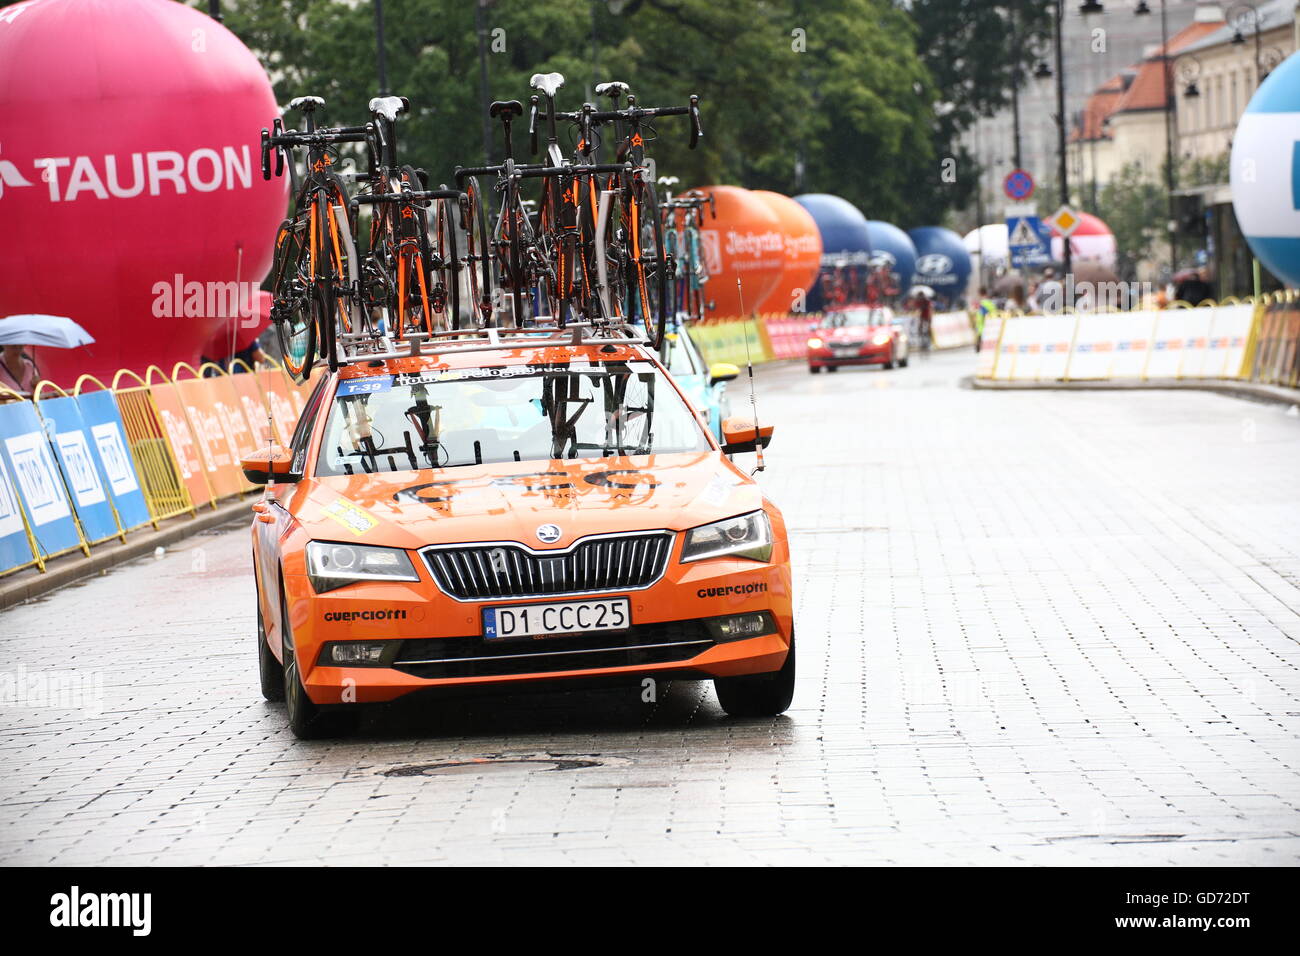 Warsaw, Poland. 12th July, 2016. 73th Tour de Pologne started with 1st stage in Warsaw. © Jakob Ratz/Pacific Press/Alamy Live News Stock Photo